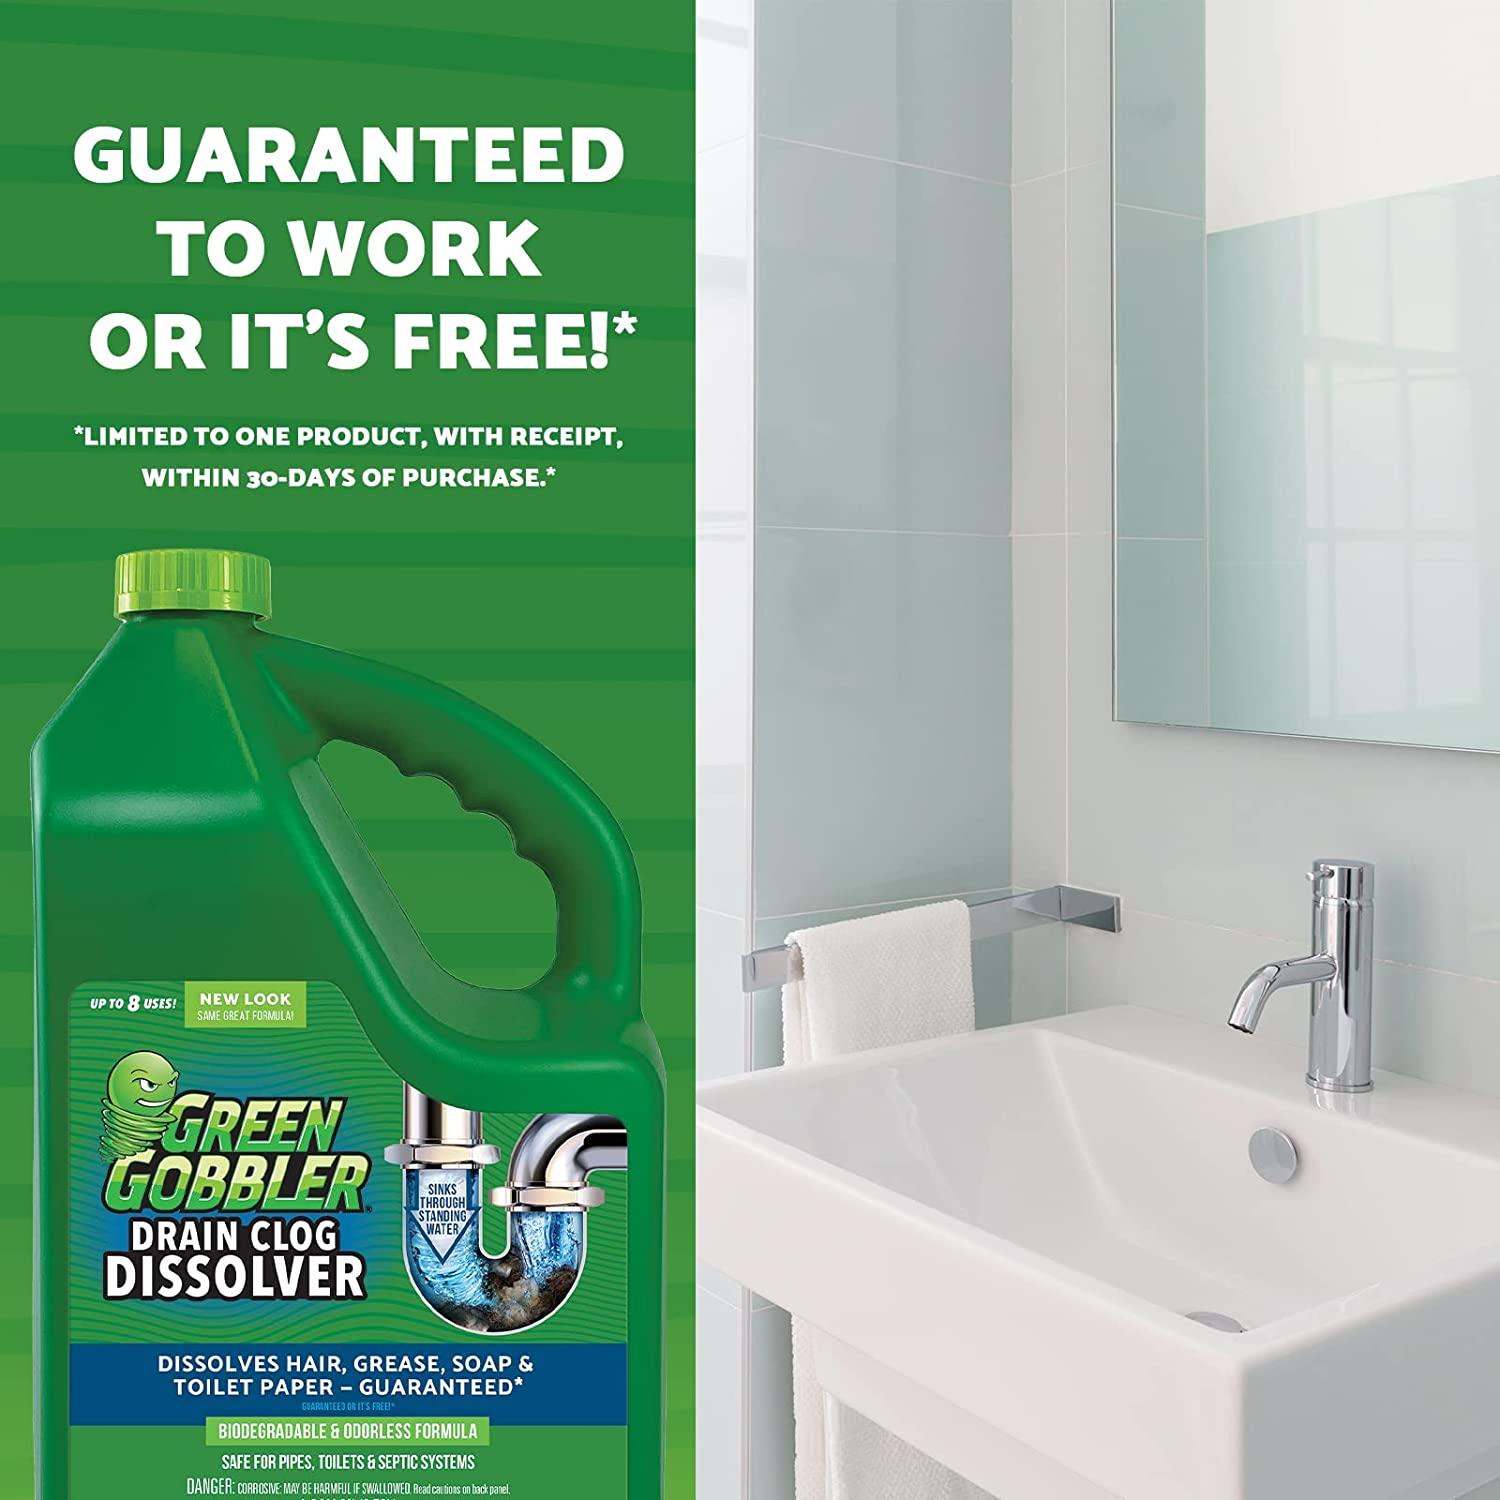  Green Gobbler Drain Clog Remover, Toilet Clog Remover, Dissolve Hair & Organic Materials from Clogged Toilets, Sinks and Drains